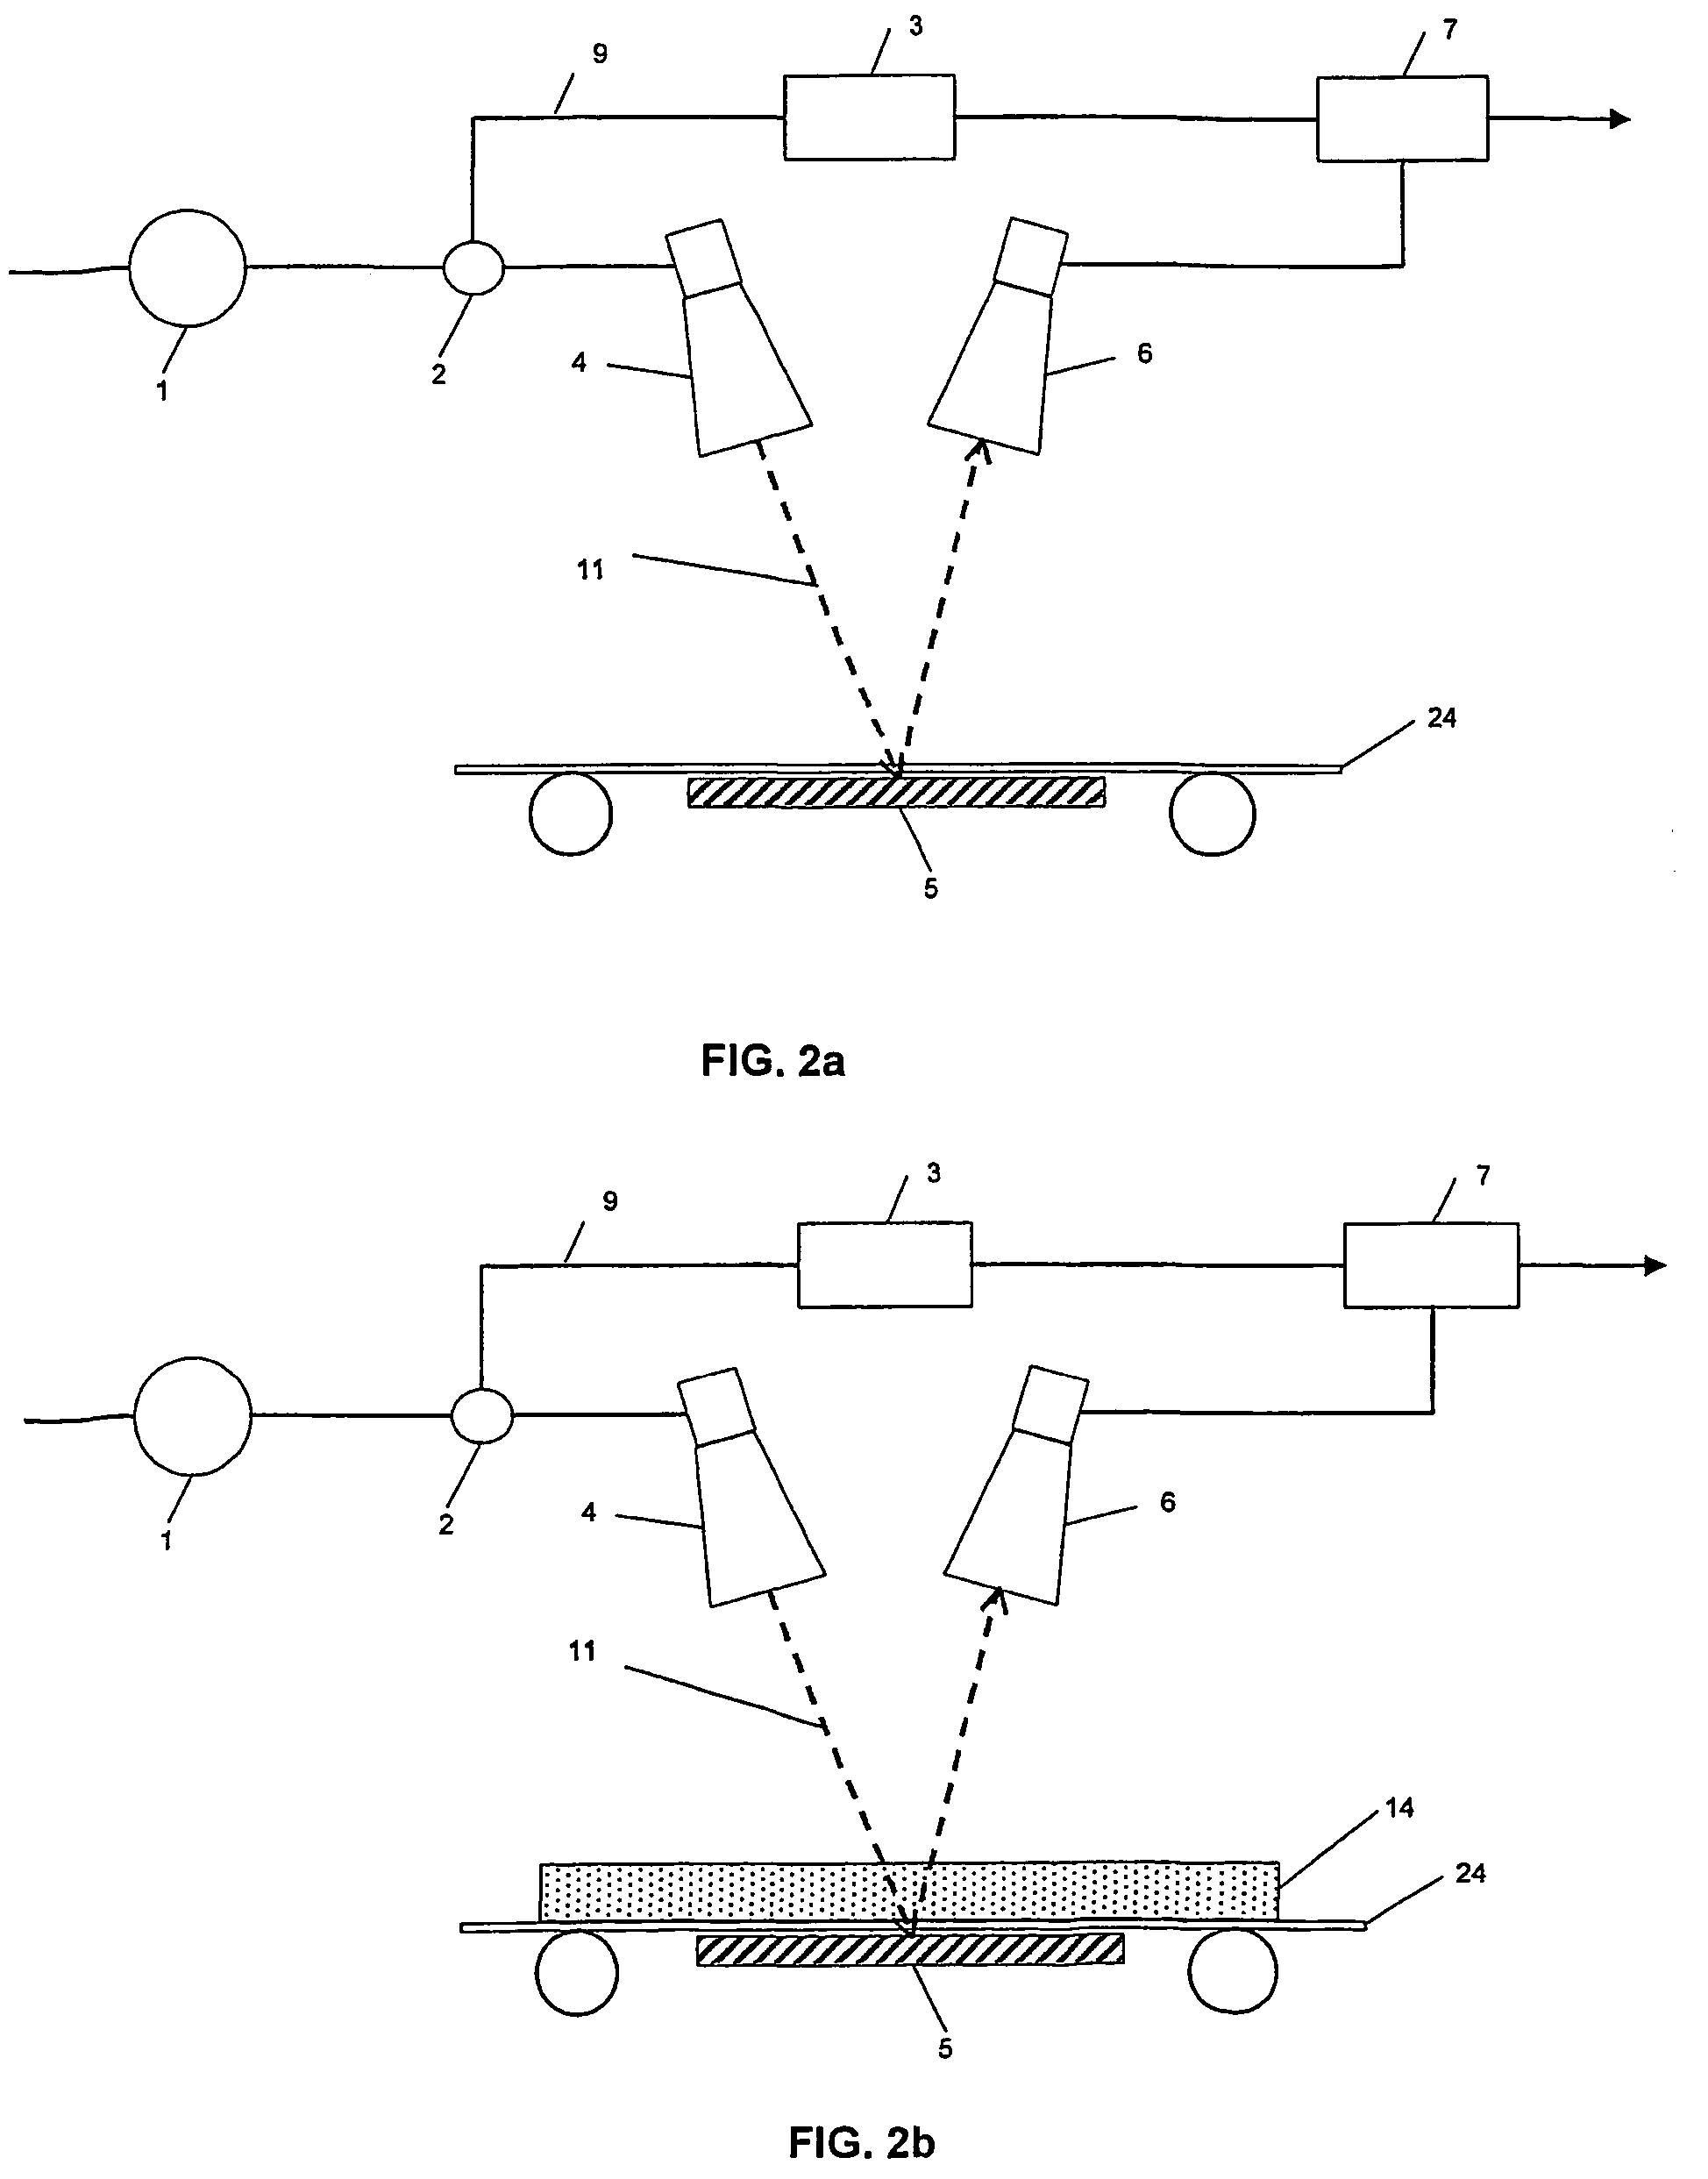 Apparatus and method for microwave determination of at least one physical parameter of a substance